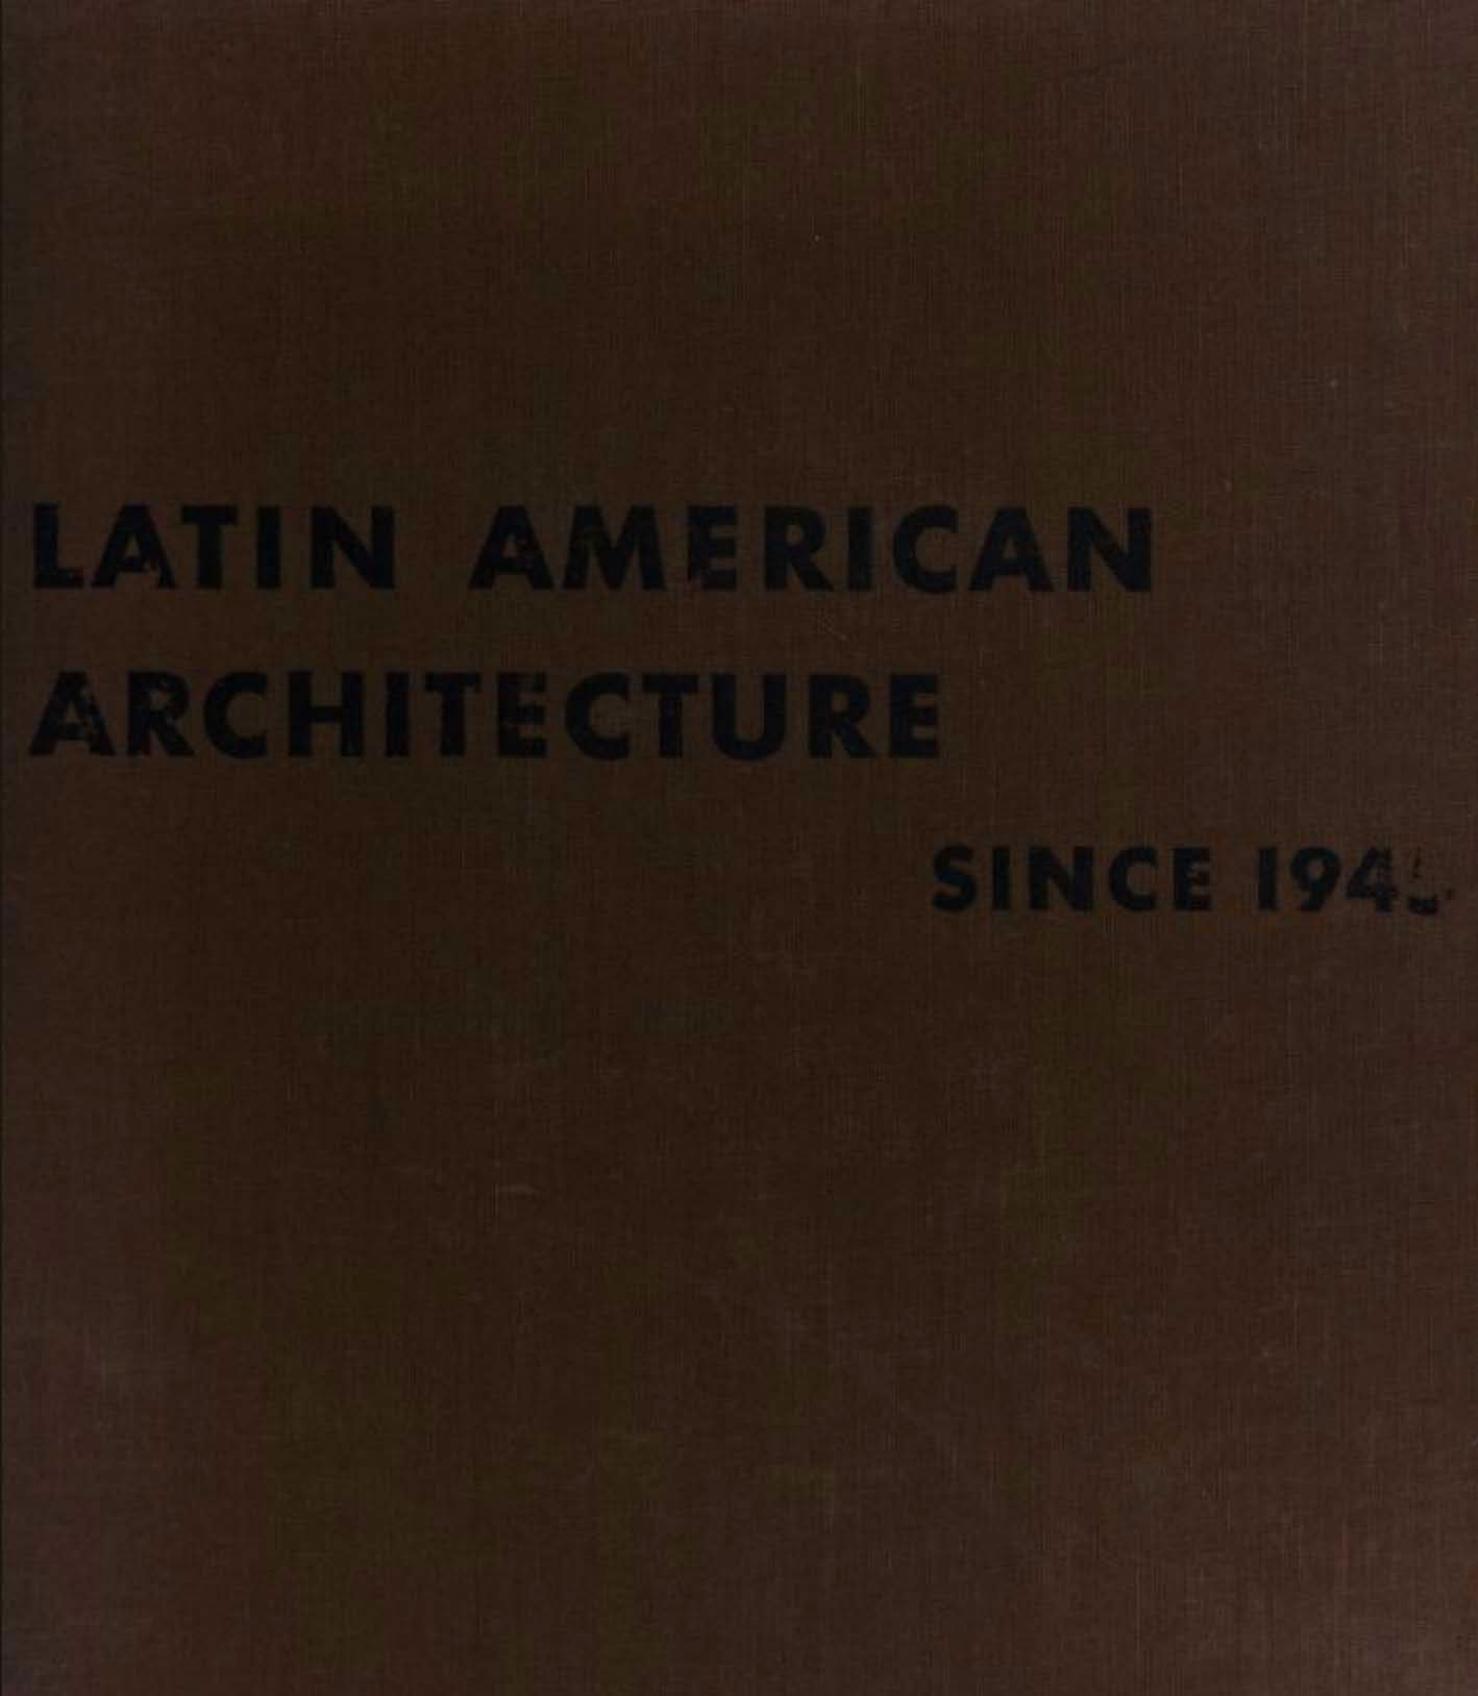 Latin American Architecture Since 1945 by Henry Russell Hitchcock